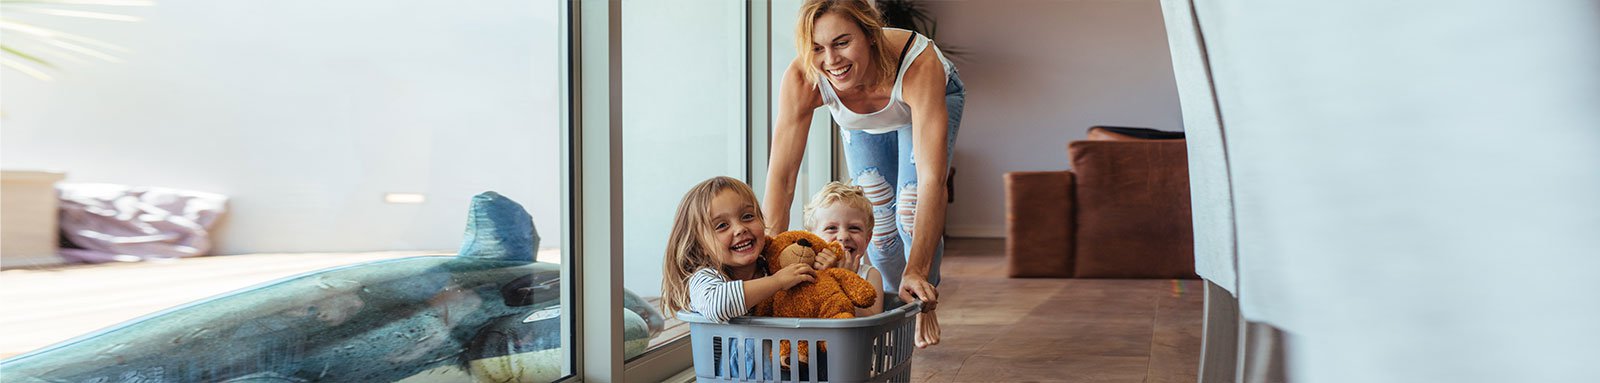 Mother pushing laundry basket with children